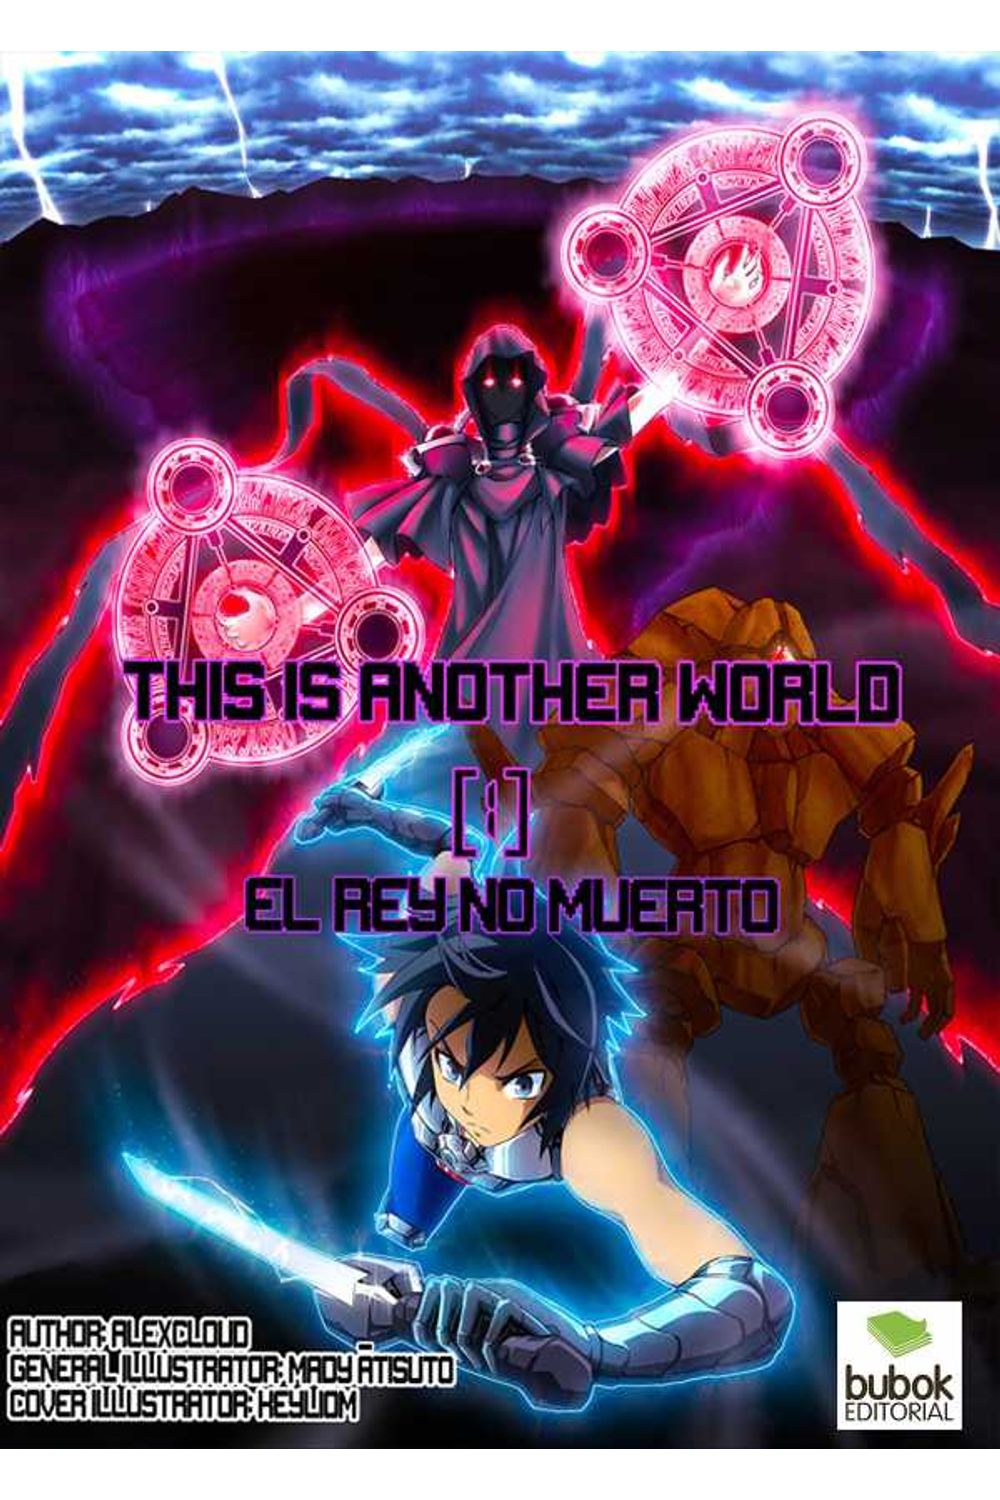 bw-this-is-another-world-1-el-rey-no-muerto-editorial-bubok-publishing-9788468554419